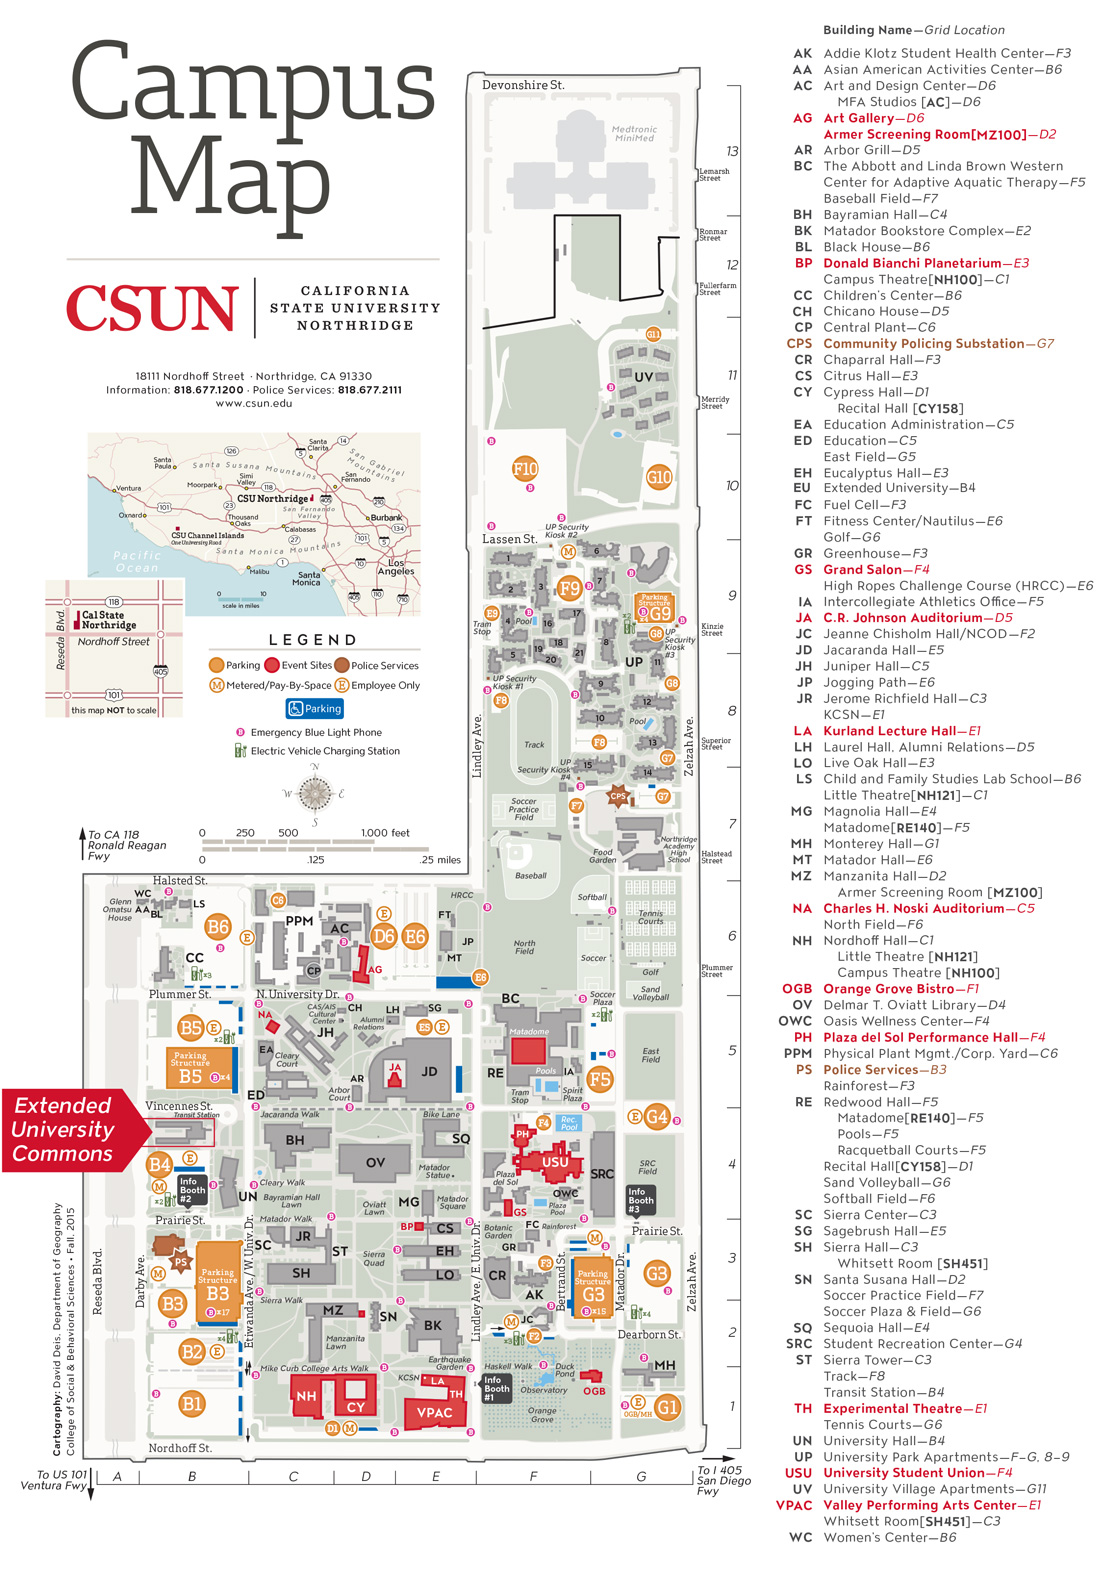 Map of CSUN campus with Extended University Building highligted.